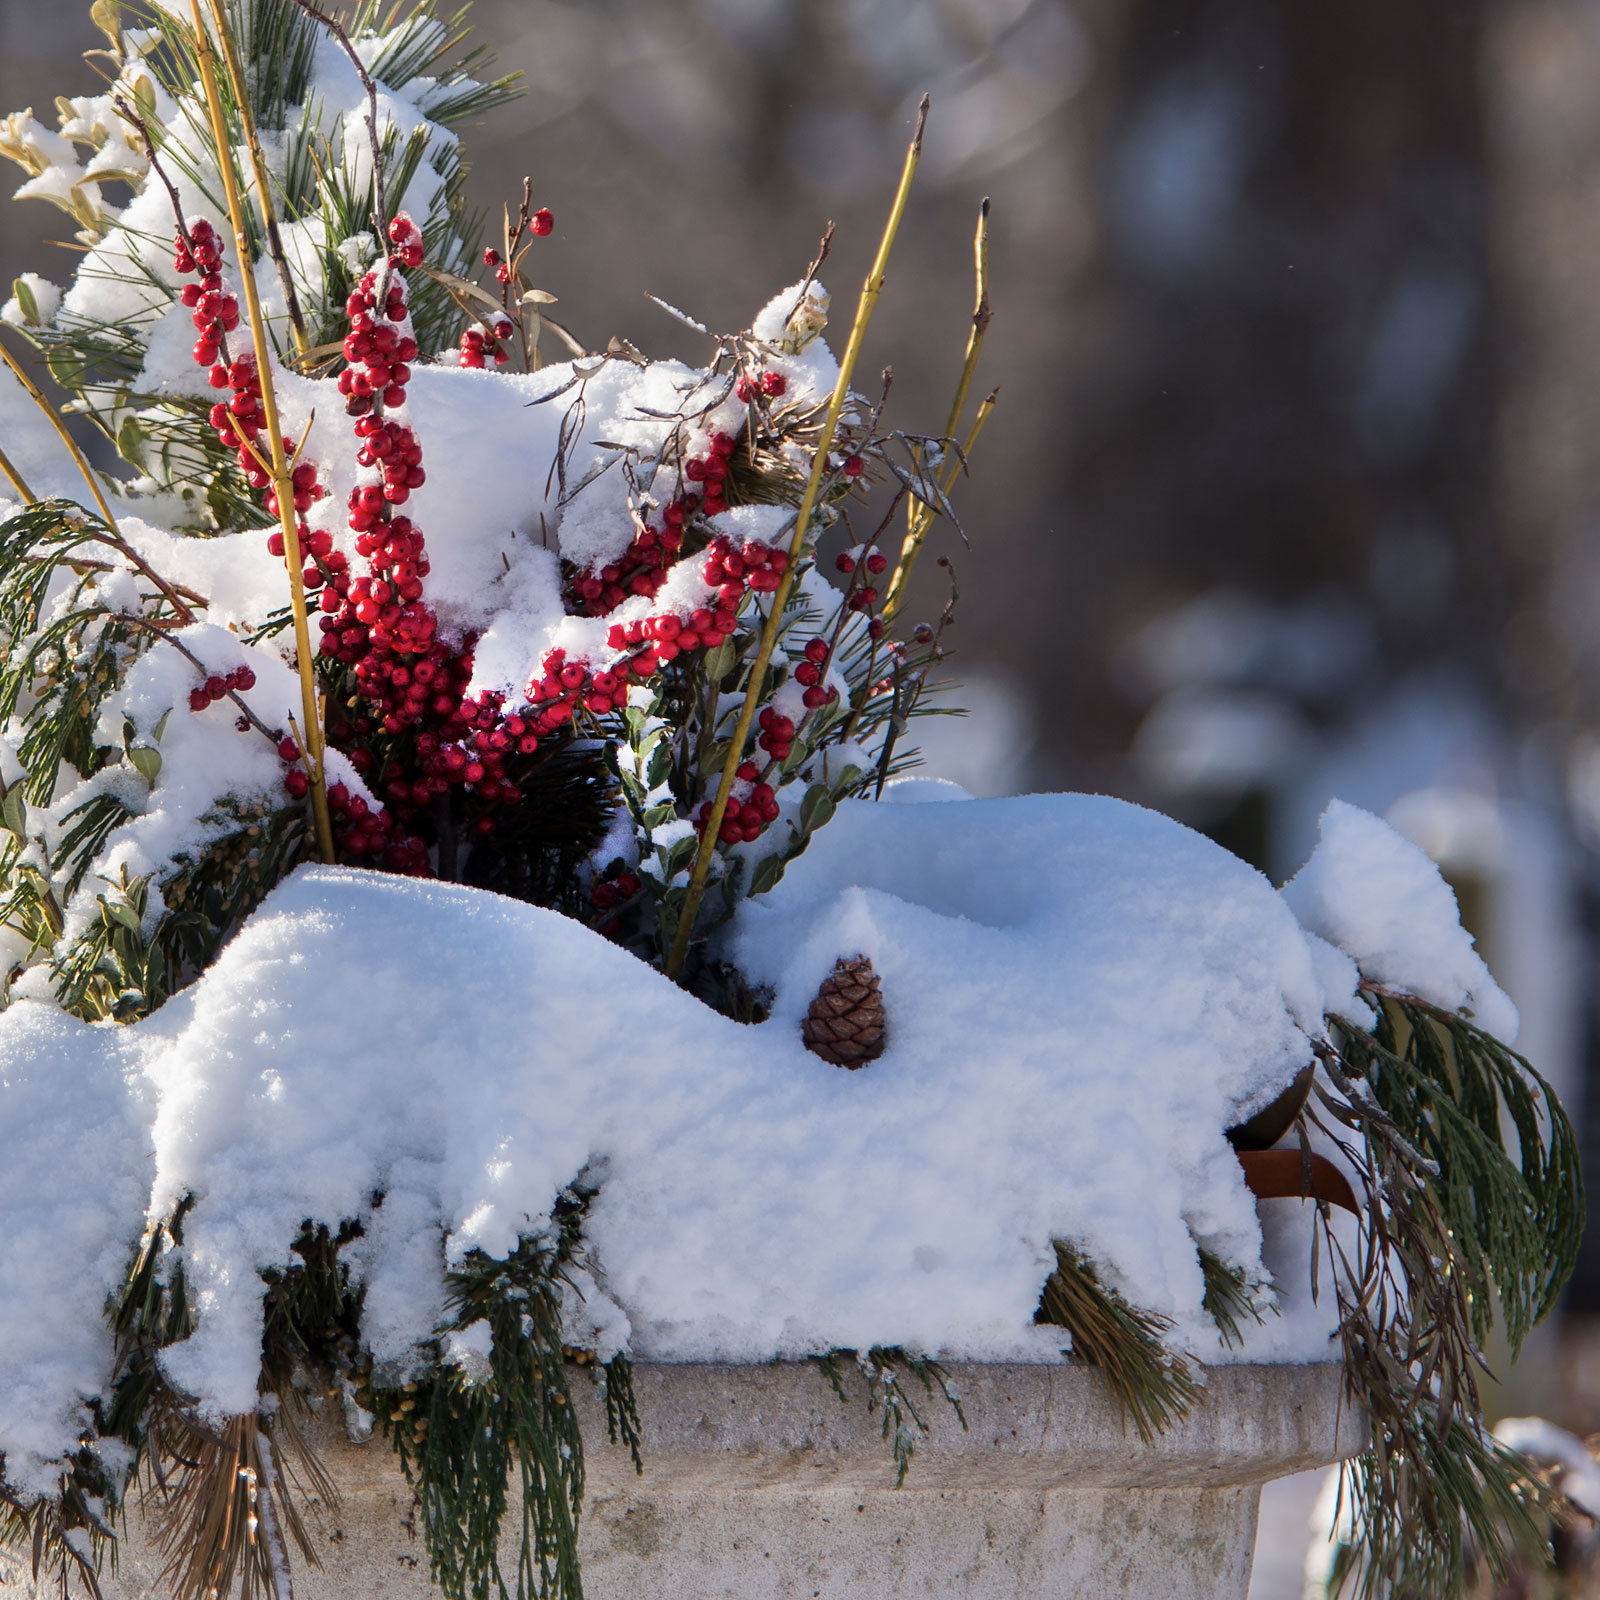 New Year’s gardening resolutions from our horticulturists